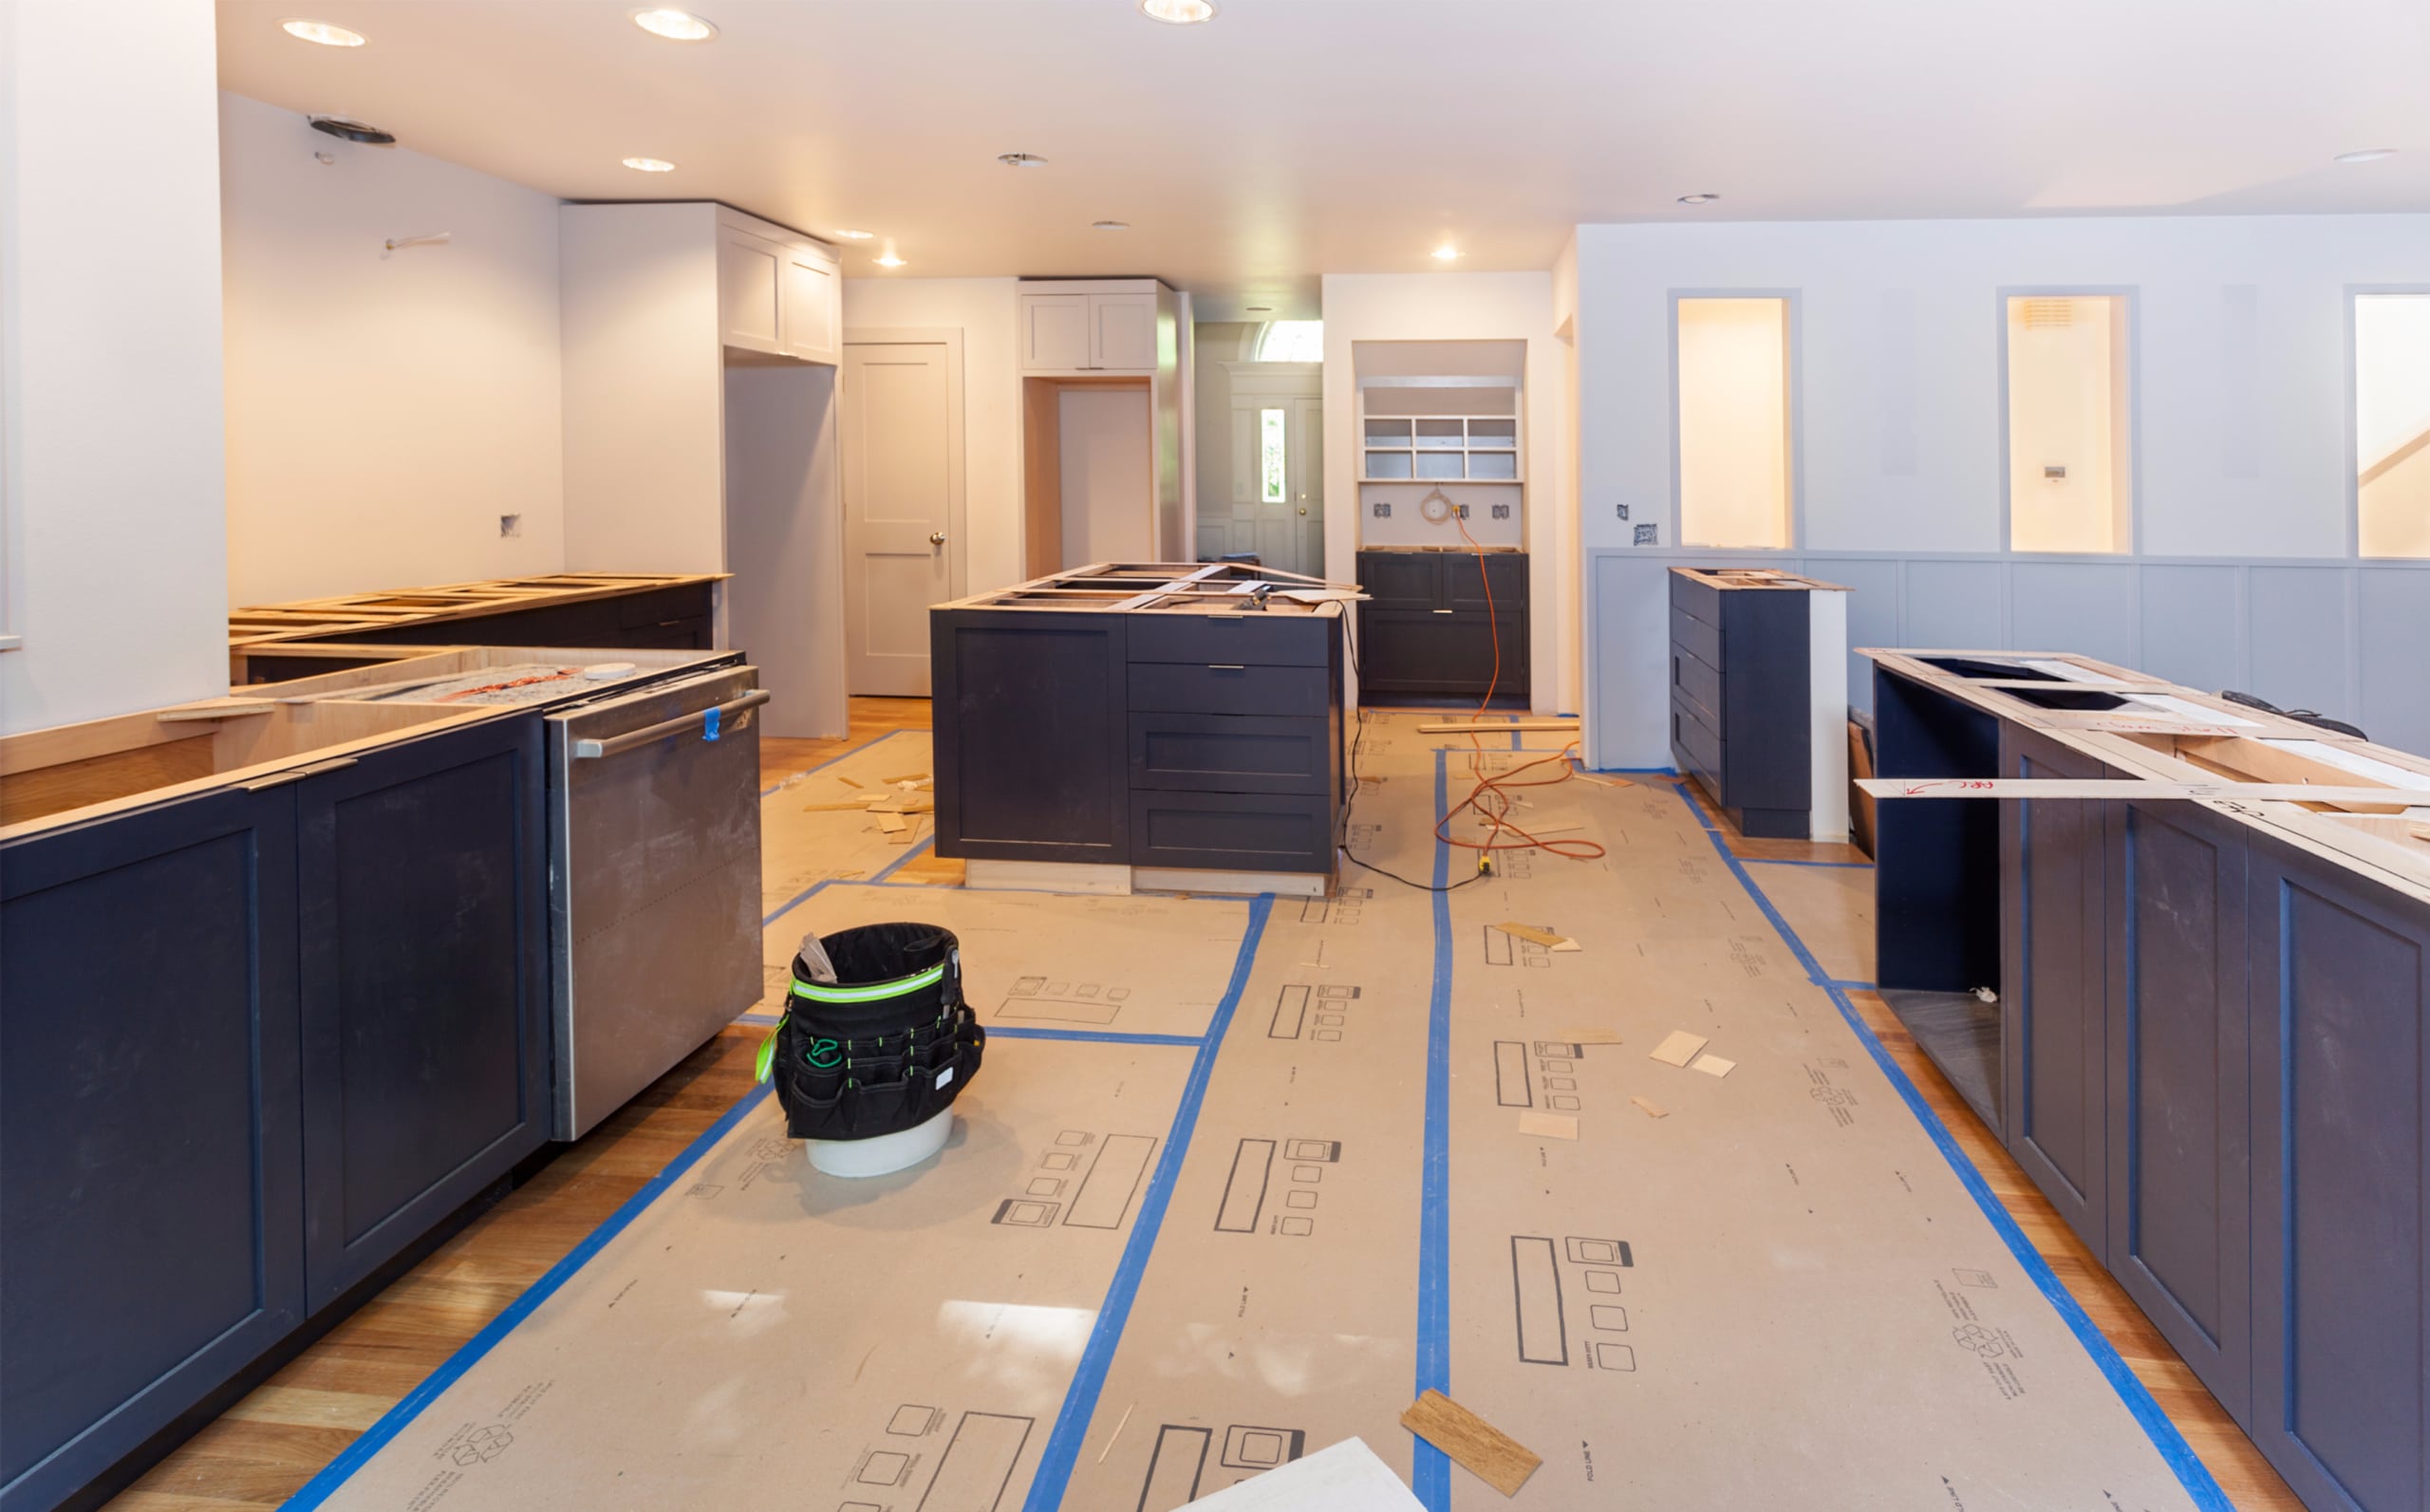 Home remodeling project: how do you find a good contractor